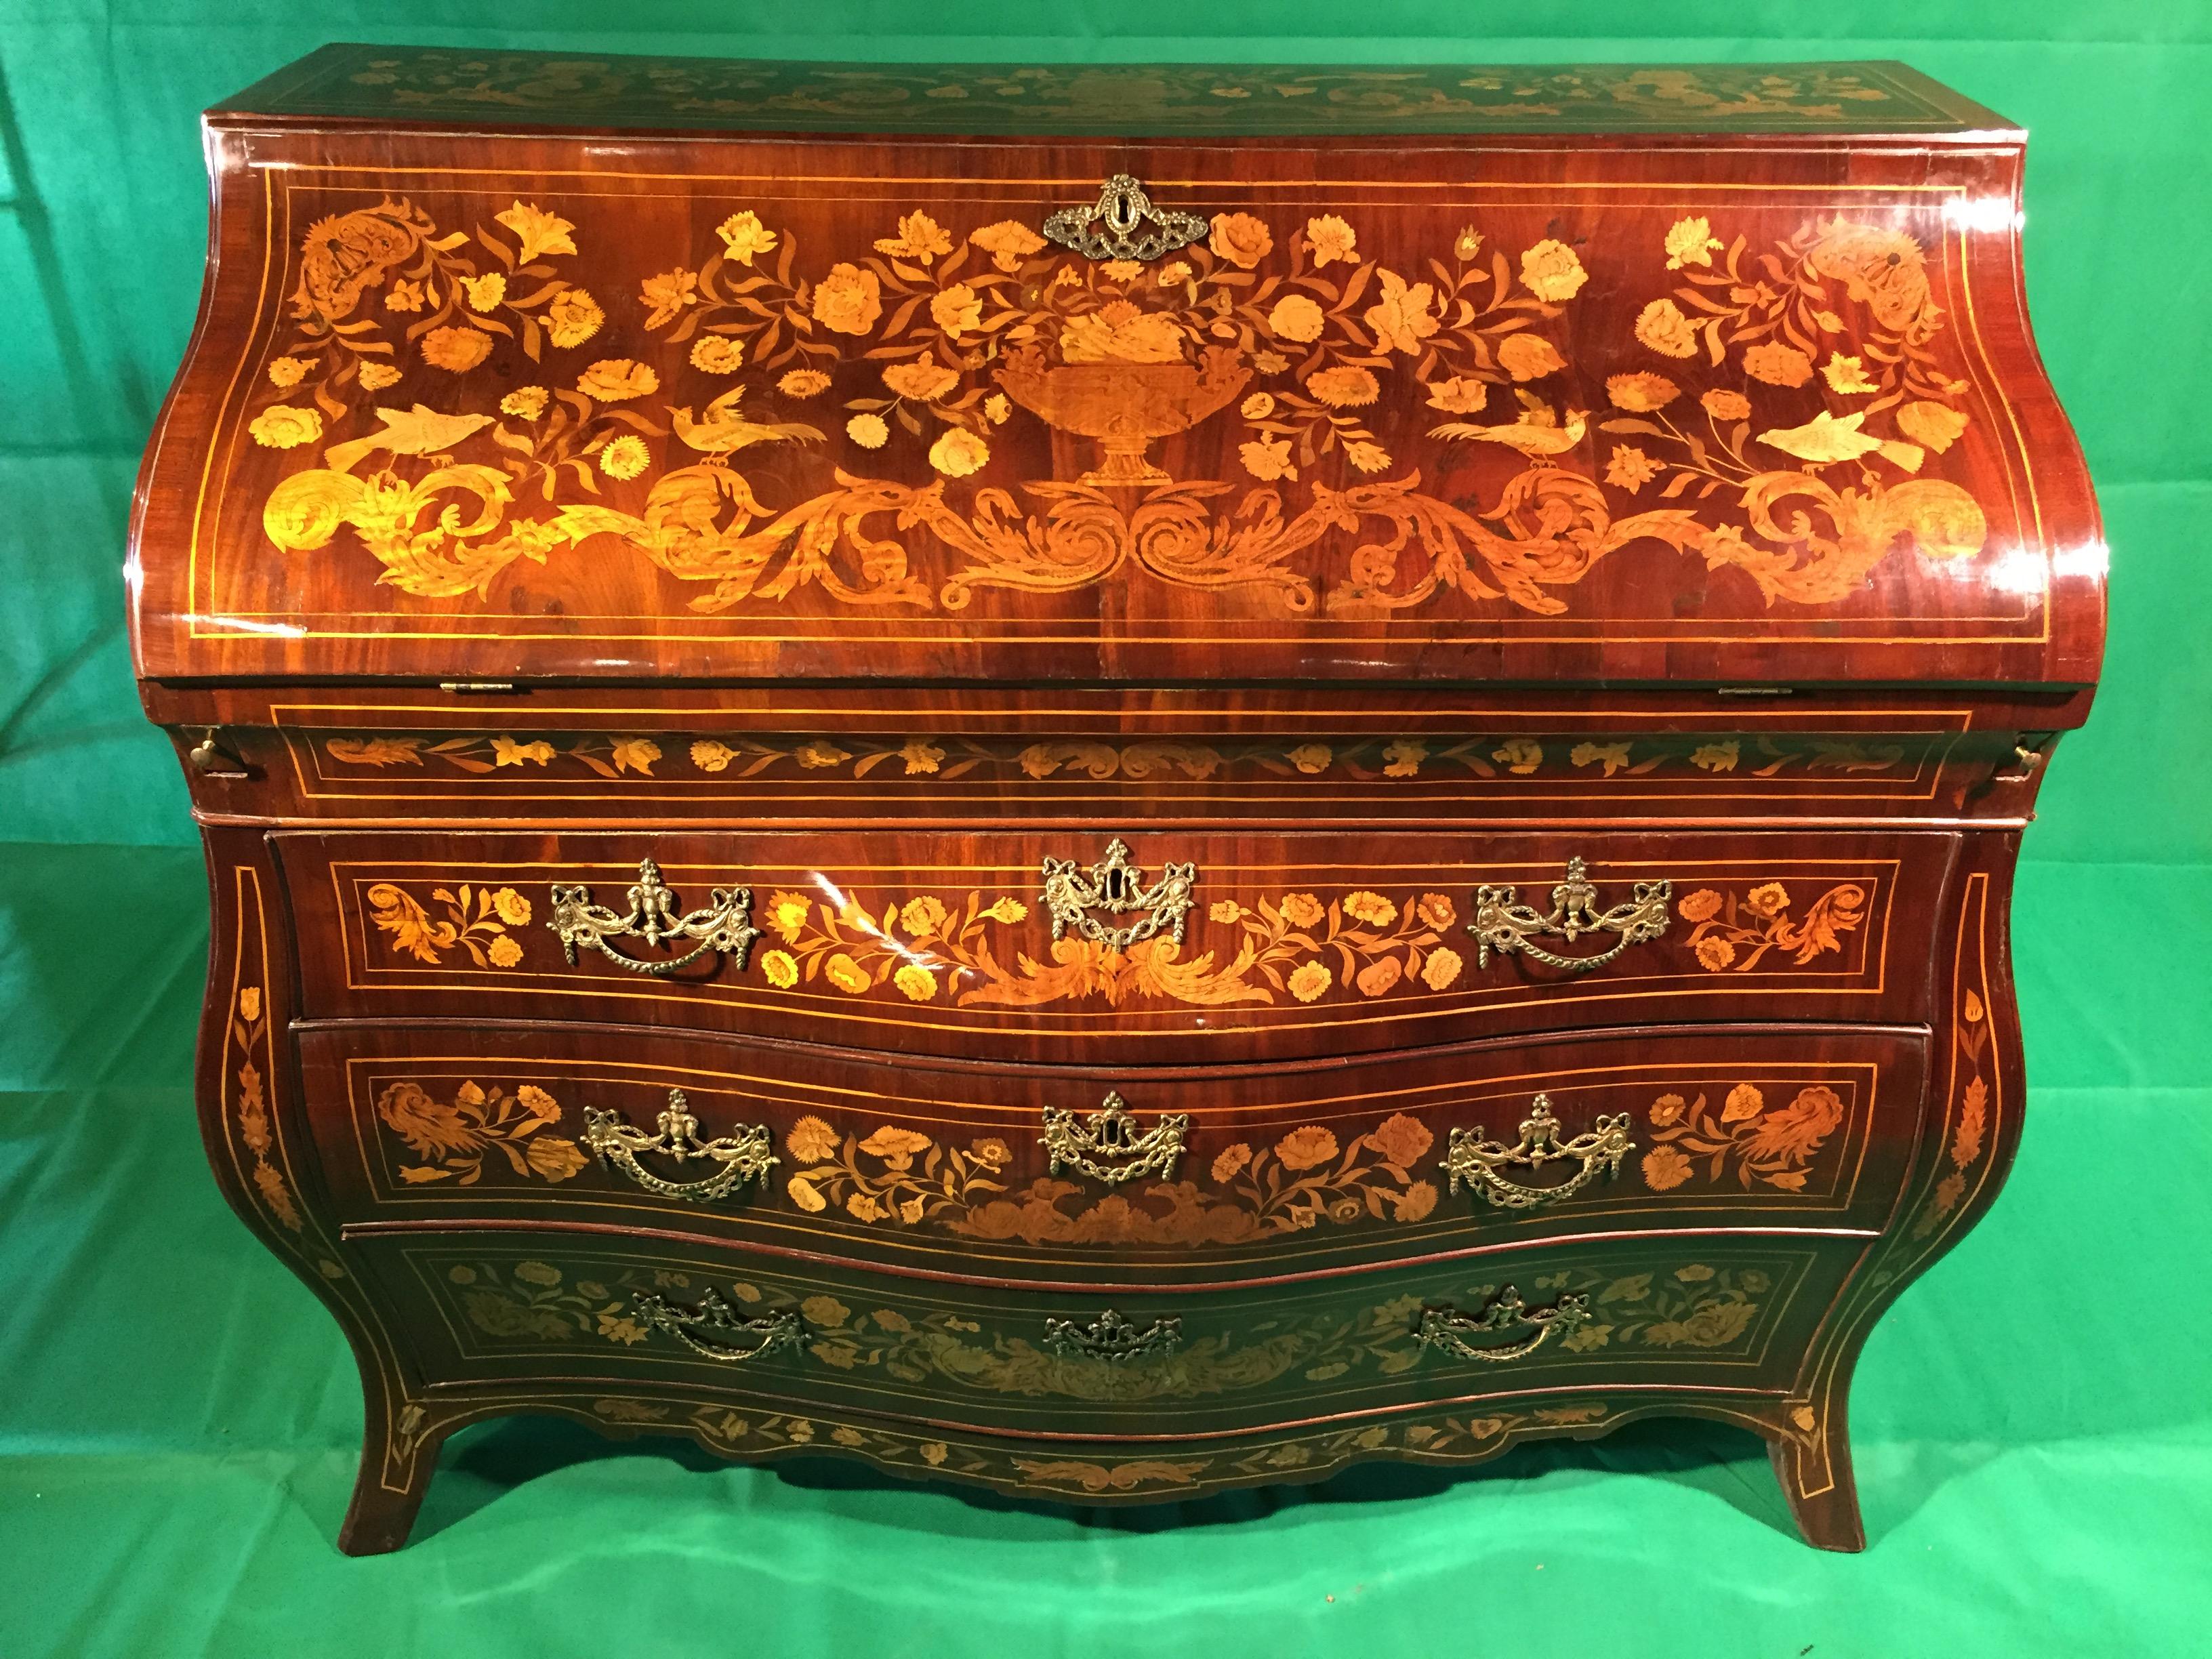 Dutch Bureau, in walnut root, finely inlaid with floral motifs in fruit wood. Side shapes moved like the front, original hardware. In excellent state of preservation, only the leather on the desk top is missing. Period second half of the 18th